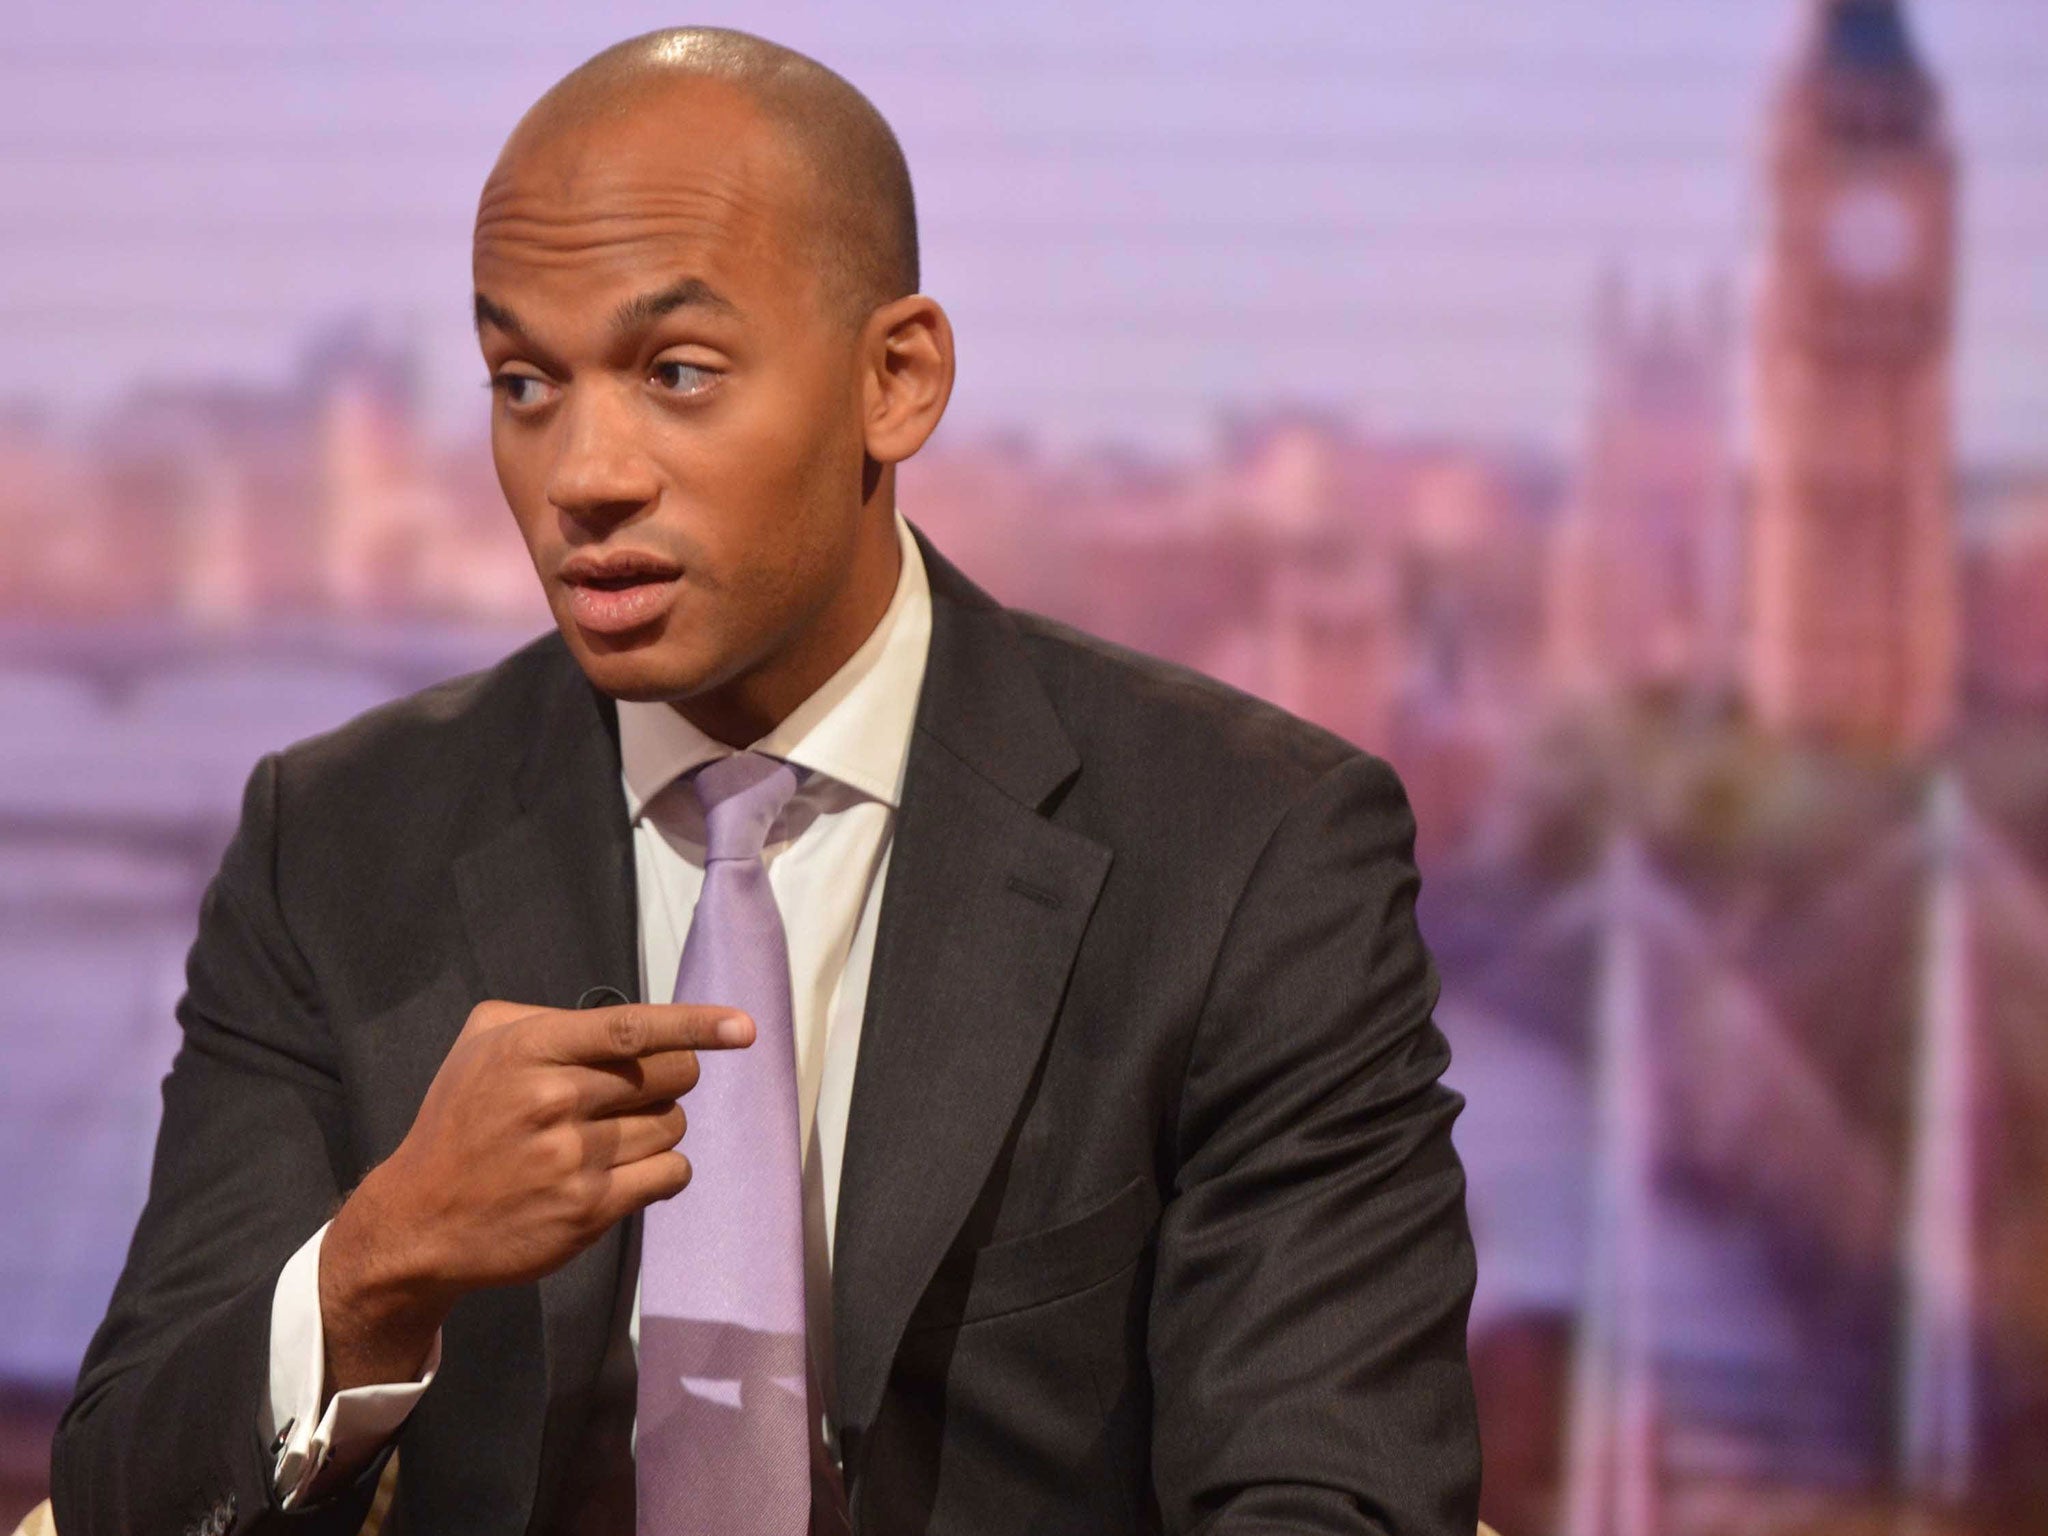 shadow Business Secretary and rising Labour party star Chuka Umunna appeared to pronounce Worcester as “Wichita” during a radio interview